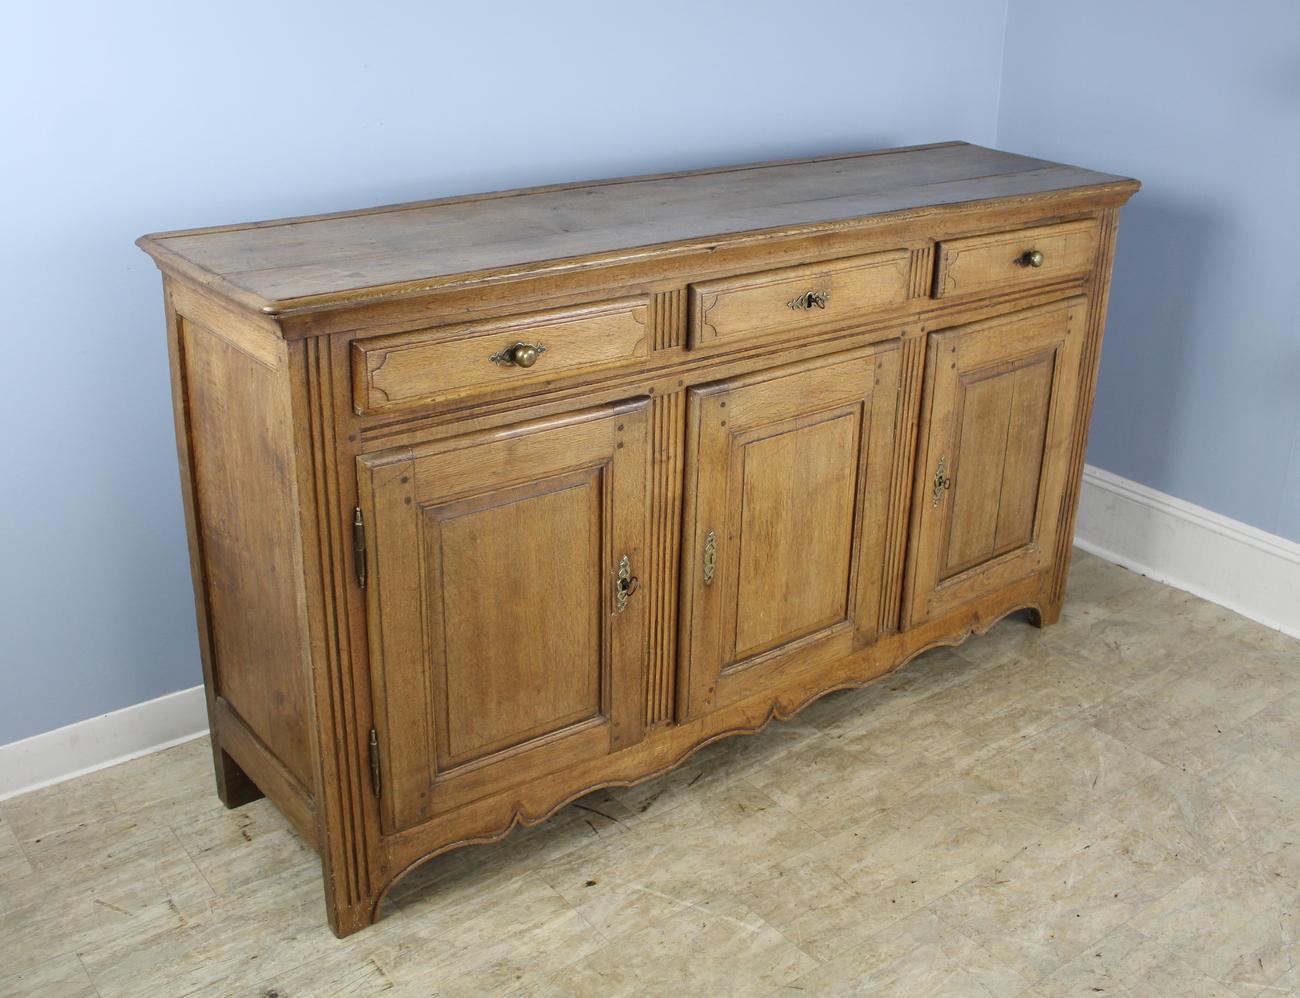 A handsome enfilade or three door French oak buffet with mellow oak grain, color and patina. The carved panels on the doors and sides give this simple sturdy piece a note of good design interest.